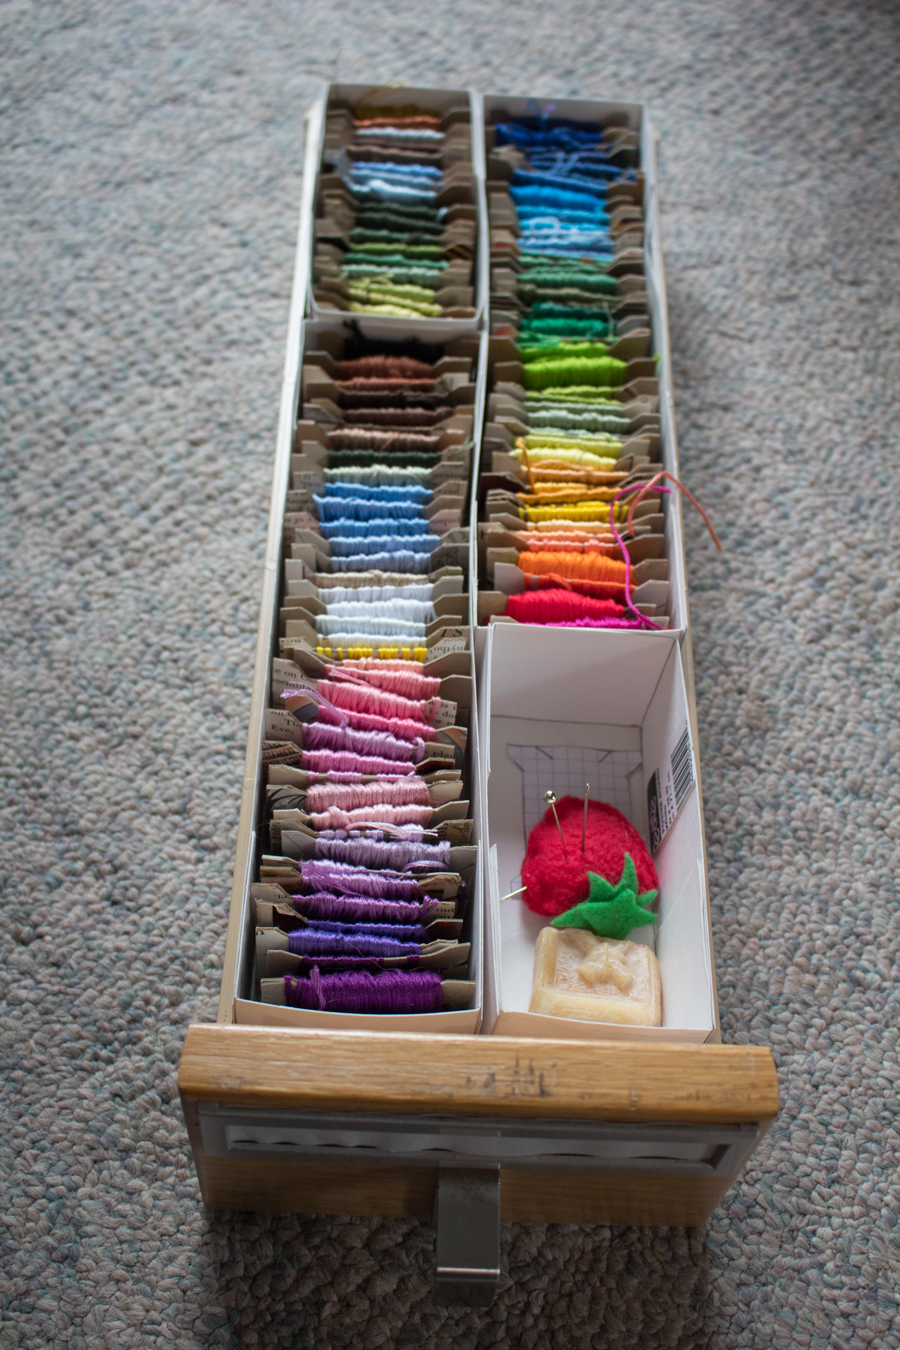 Craft Knife: I Organized our Embroidery Floss into a Card Catalog